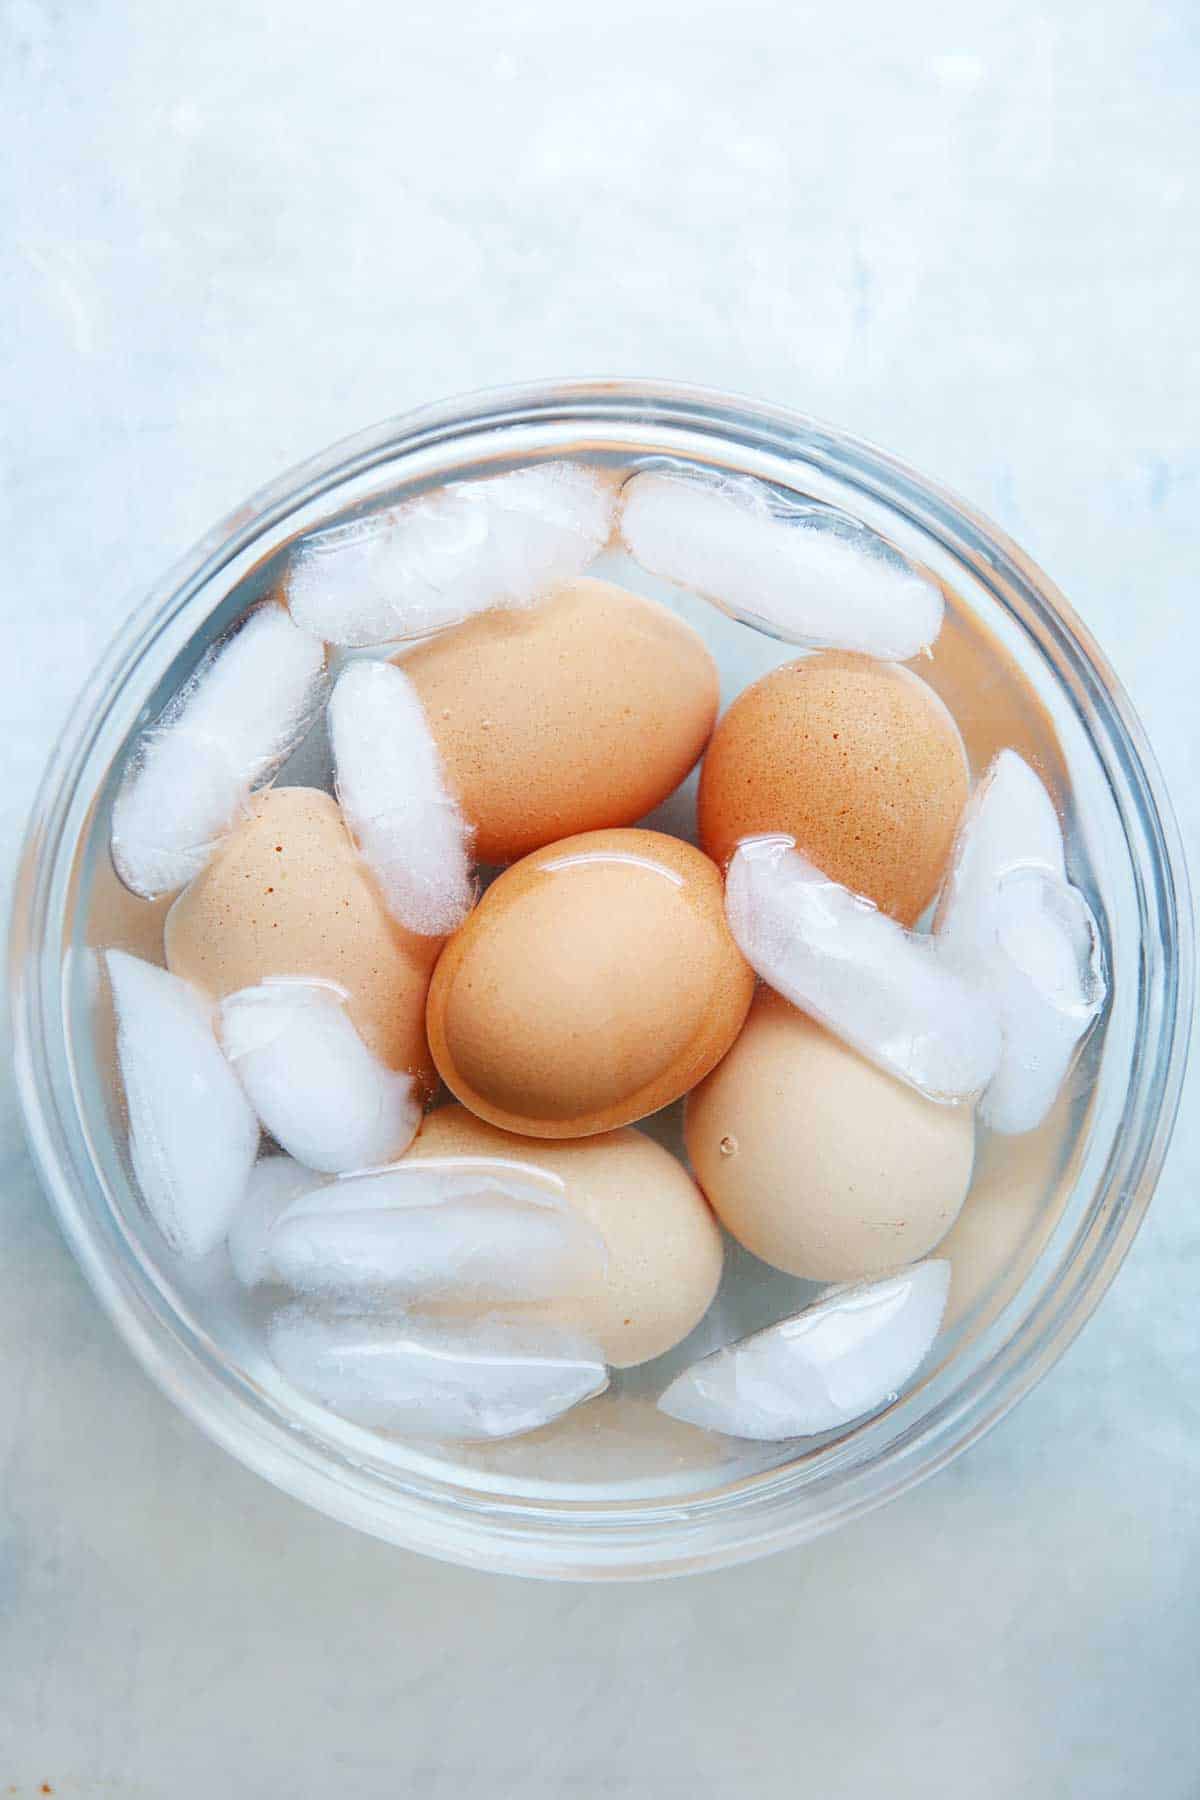 ow to Hard Boil eggs in the Instant Pot in ice bath